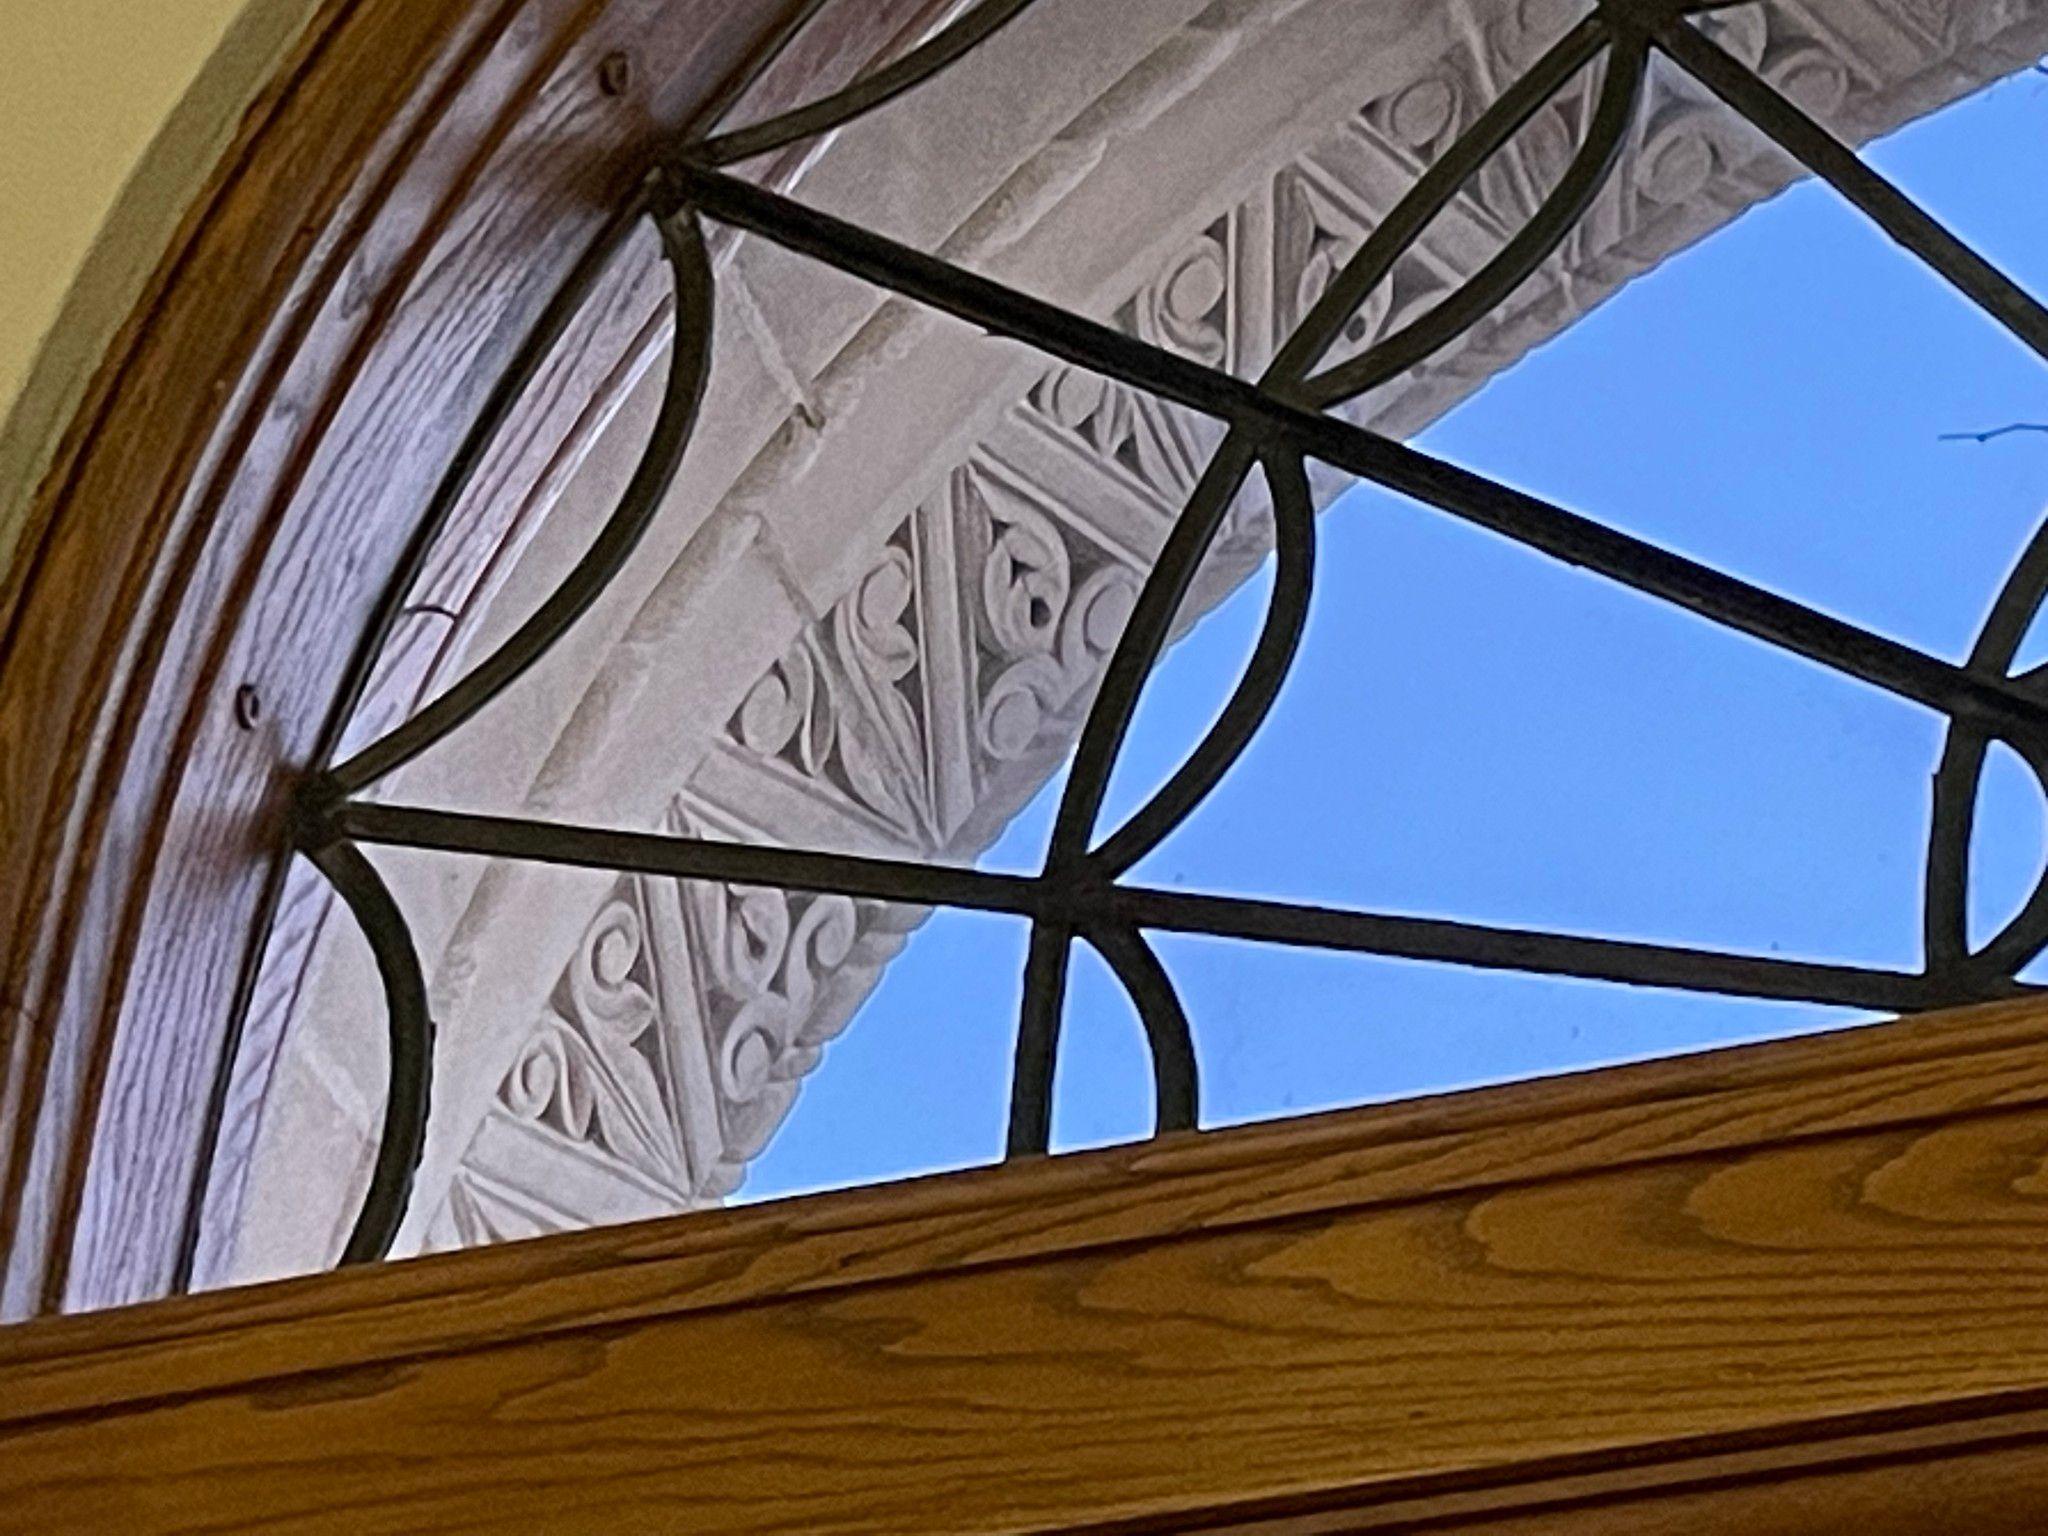 Photograph of the semicircle window above the library's exterior entrance doors.